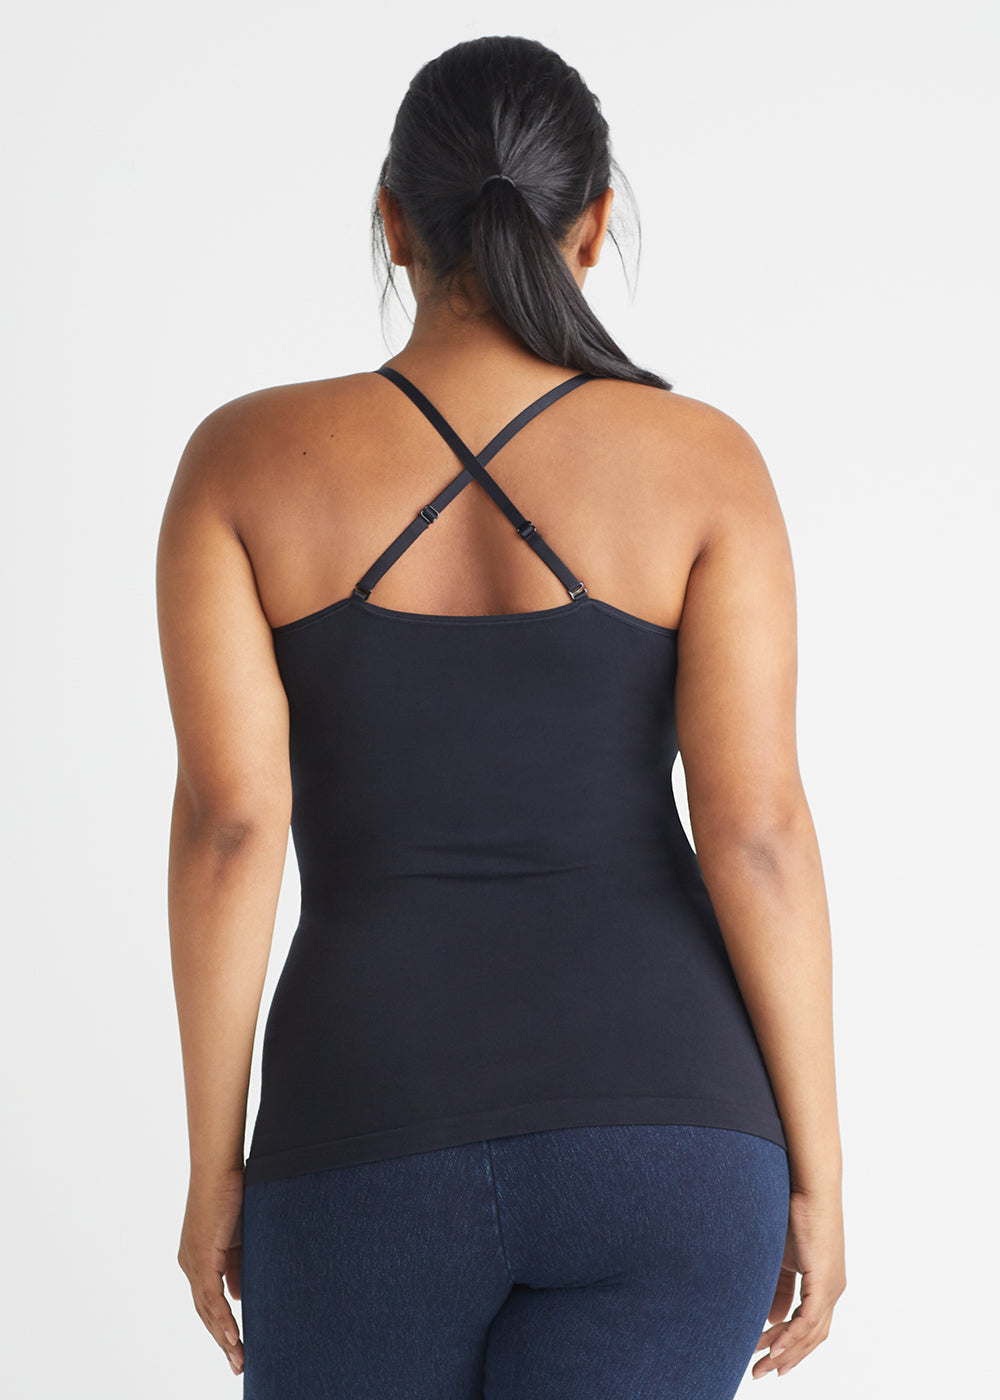 Sequence Bralette, yoga top - lyocell